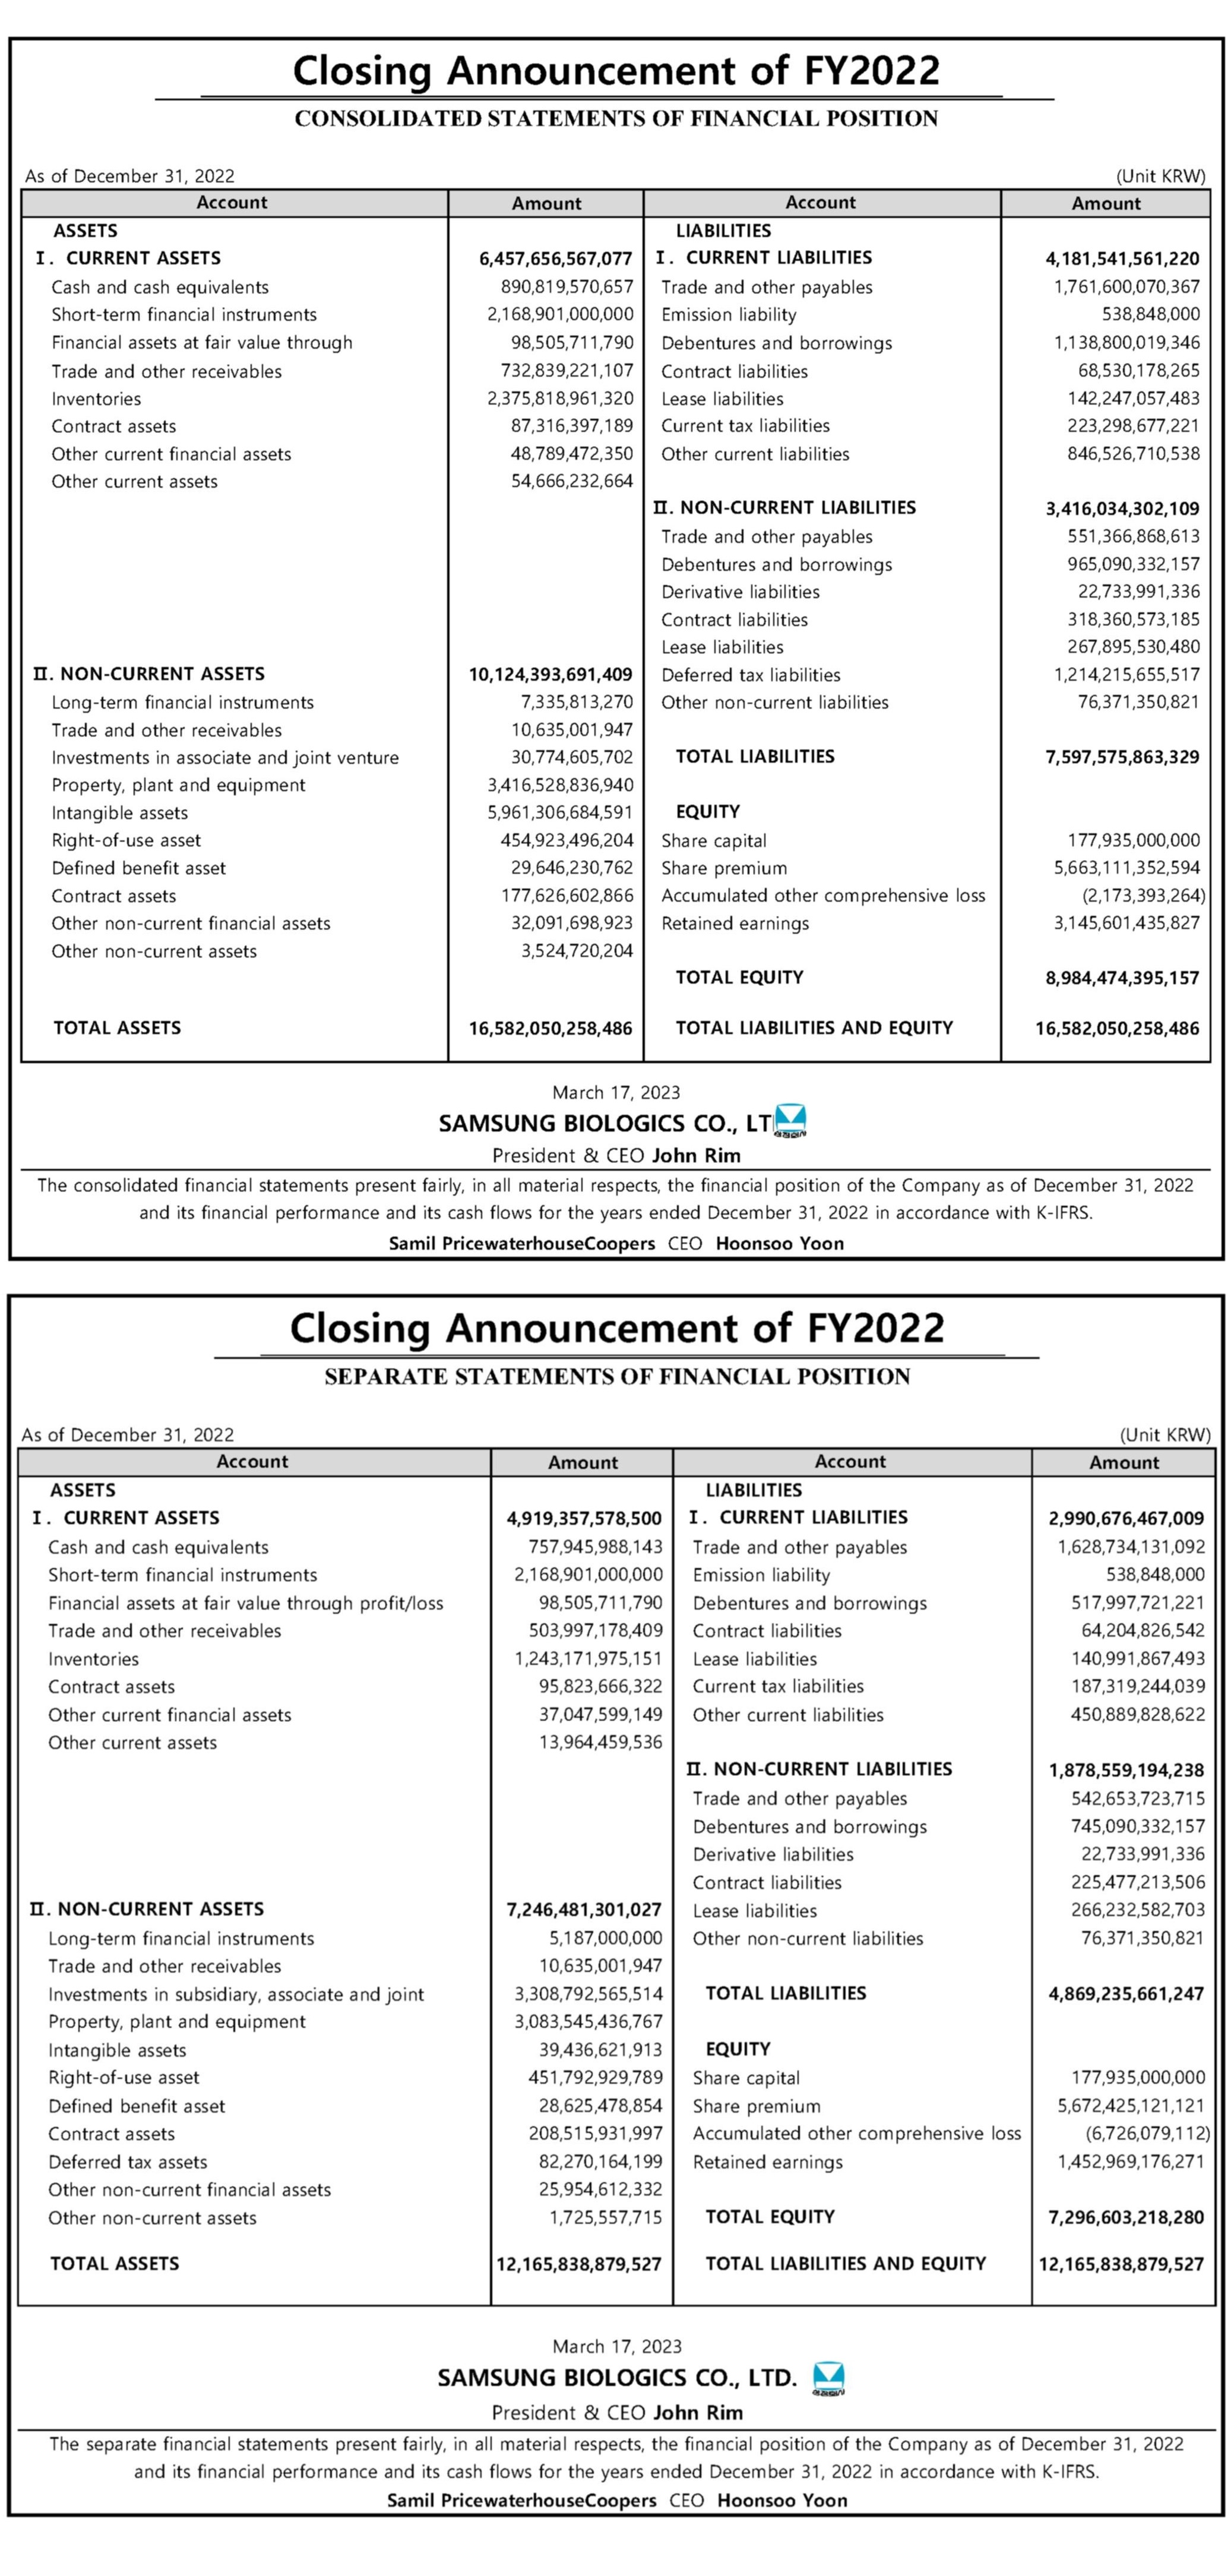 2022 Closing Announcement of FY2022 pc